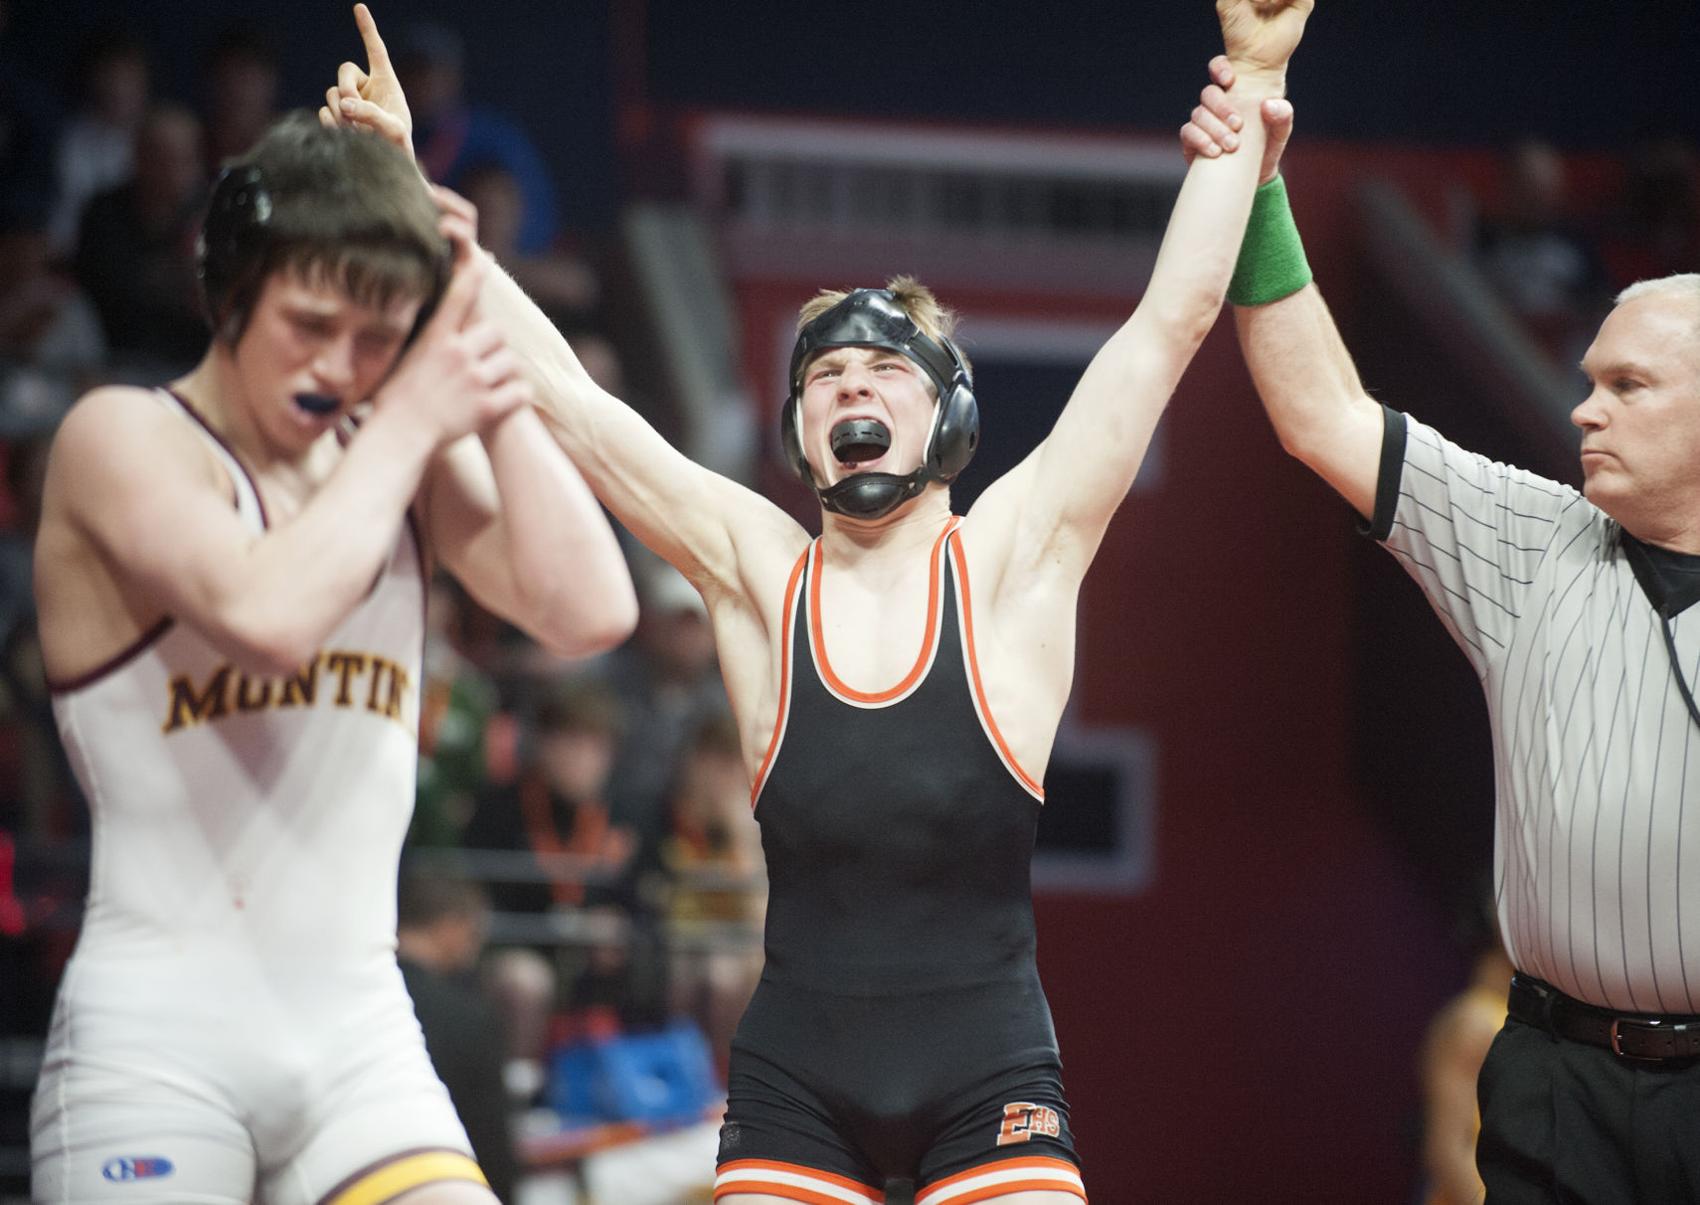 Surtin brings home Edwardsville's first state championship Wrestling